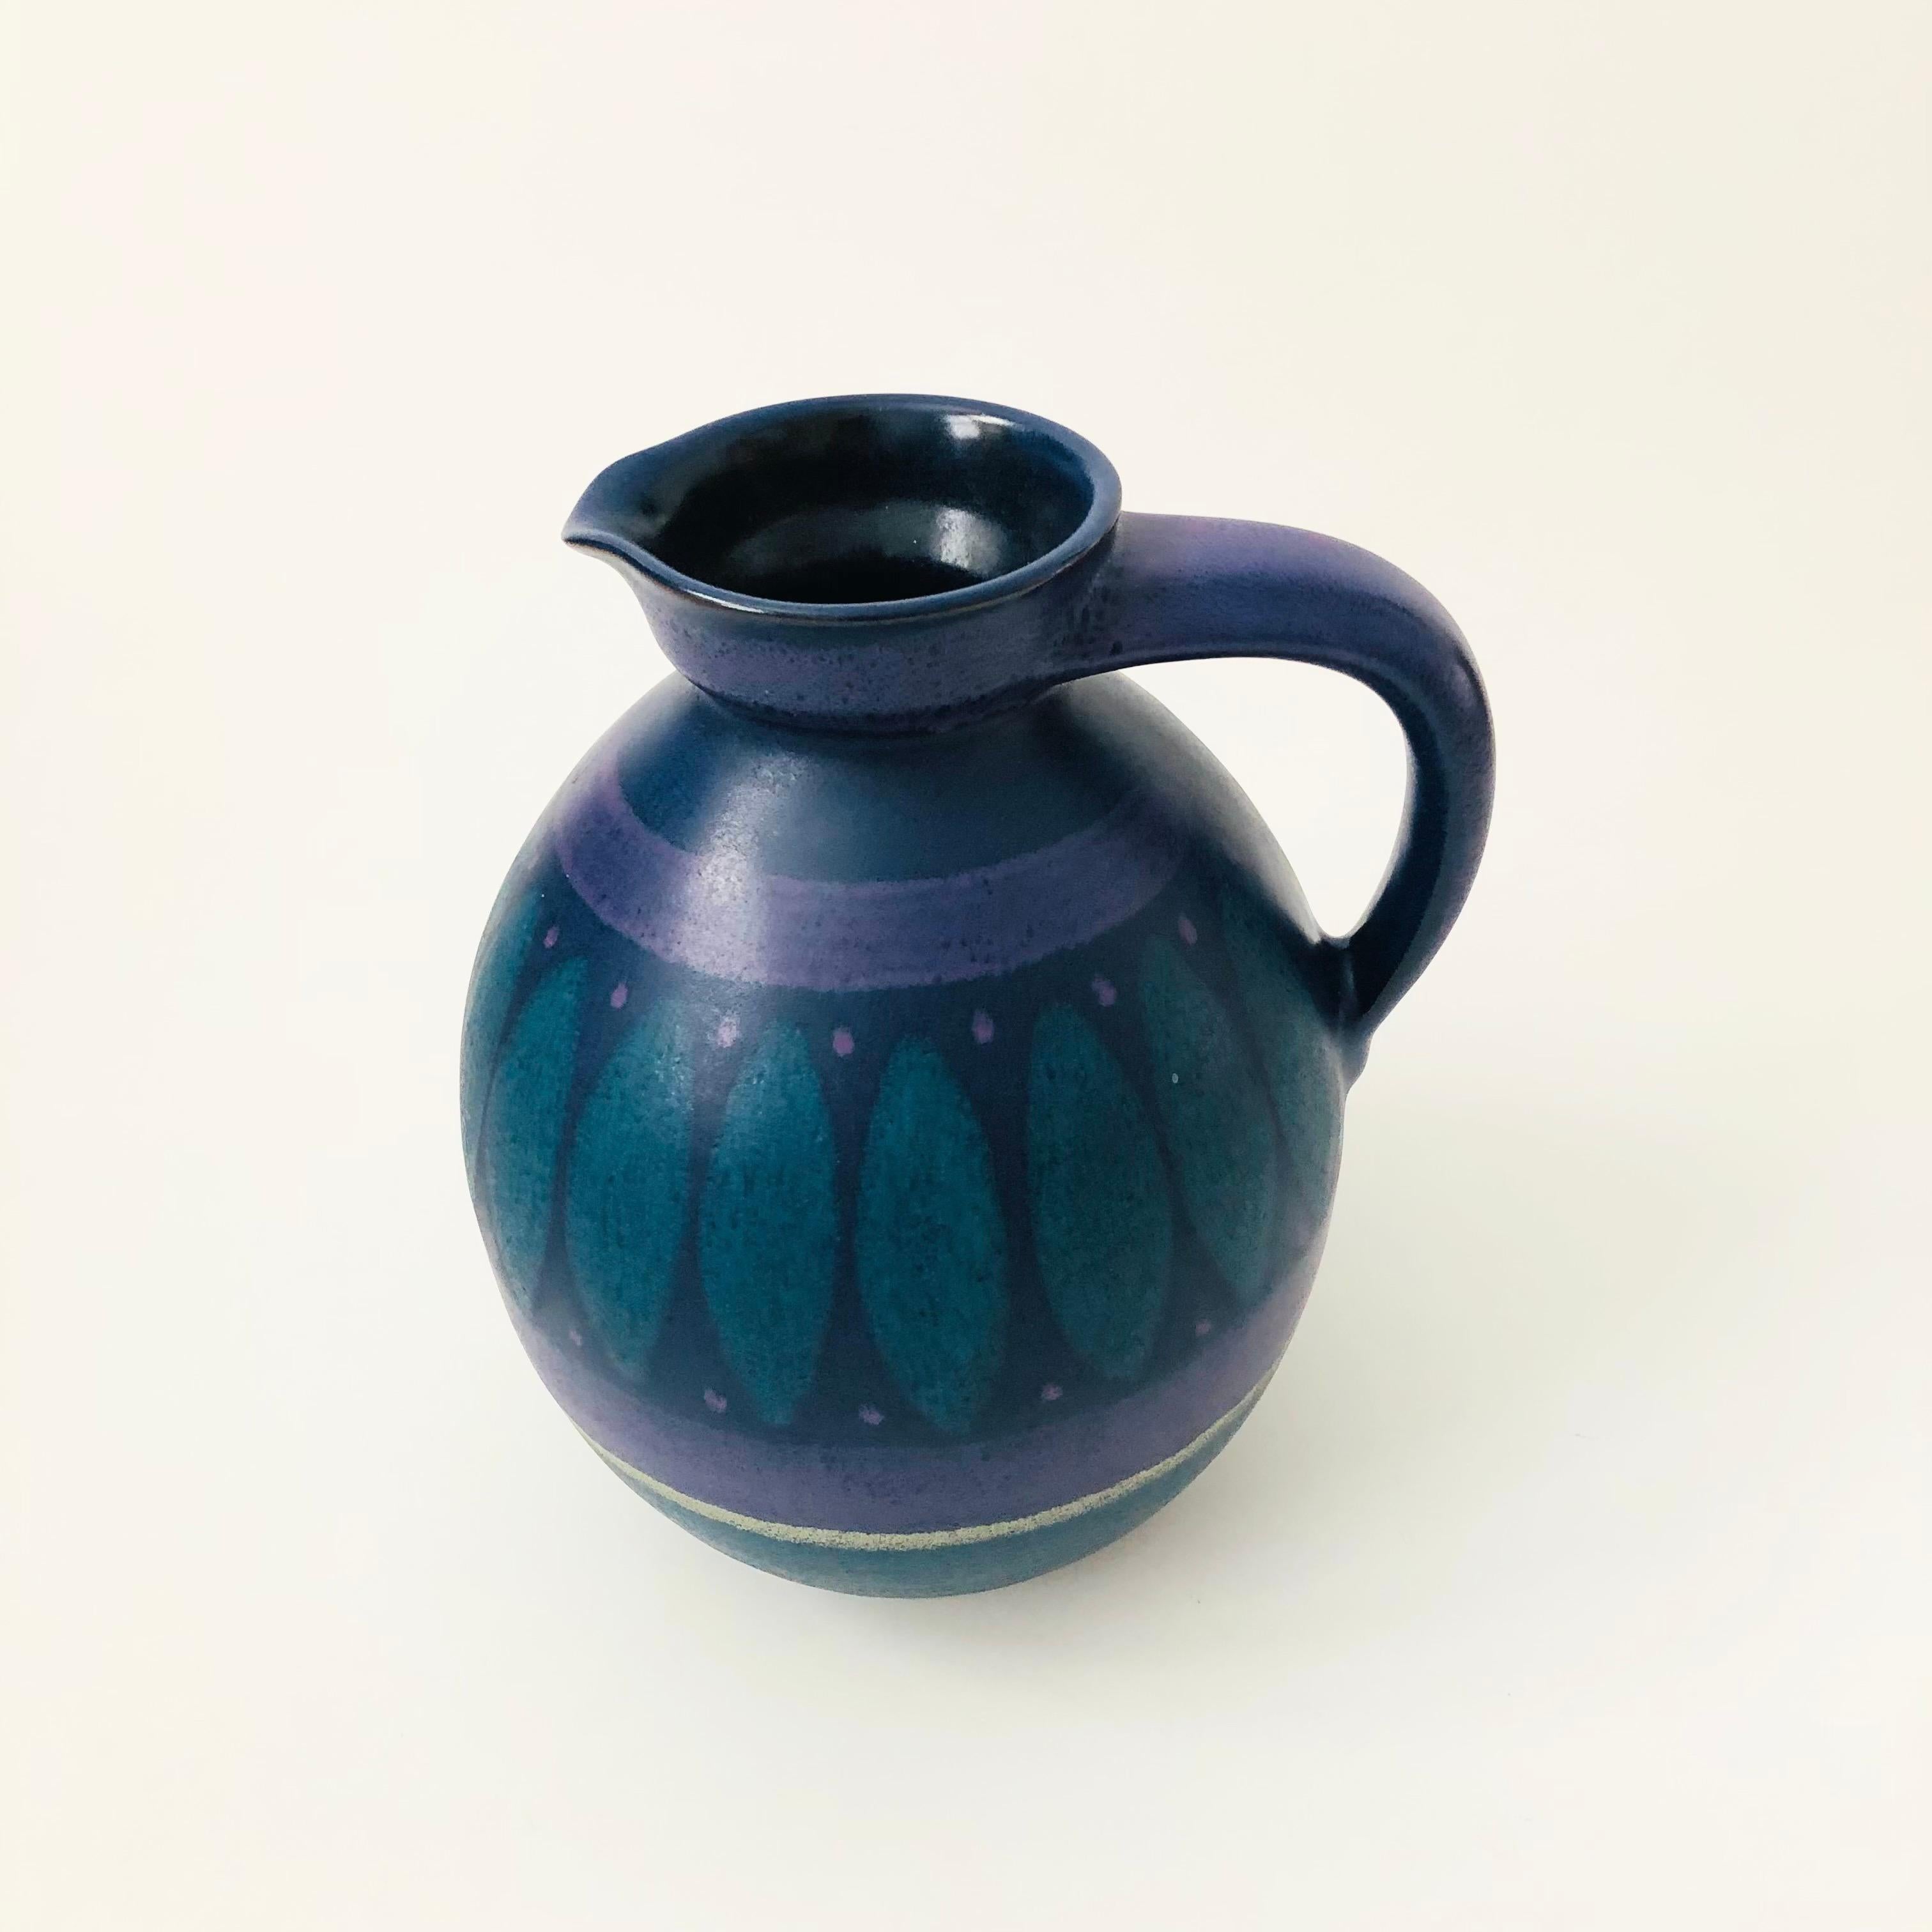 A large 1970s West German art pottery pitcher. Made by KMK (Kupfermühle Keramik) in the 